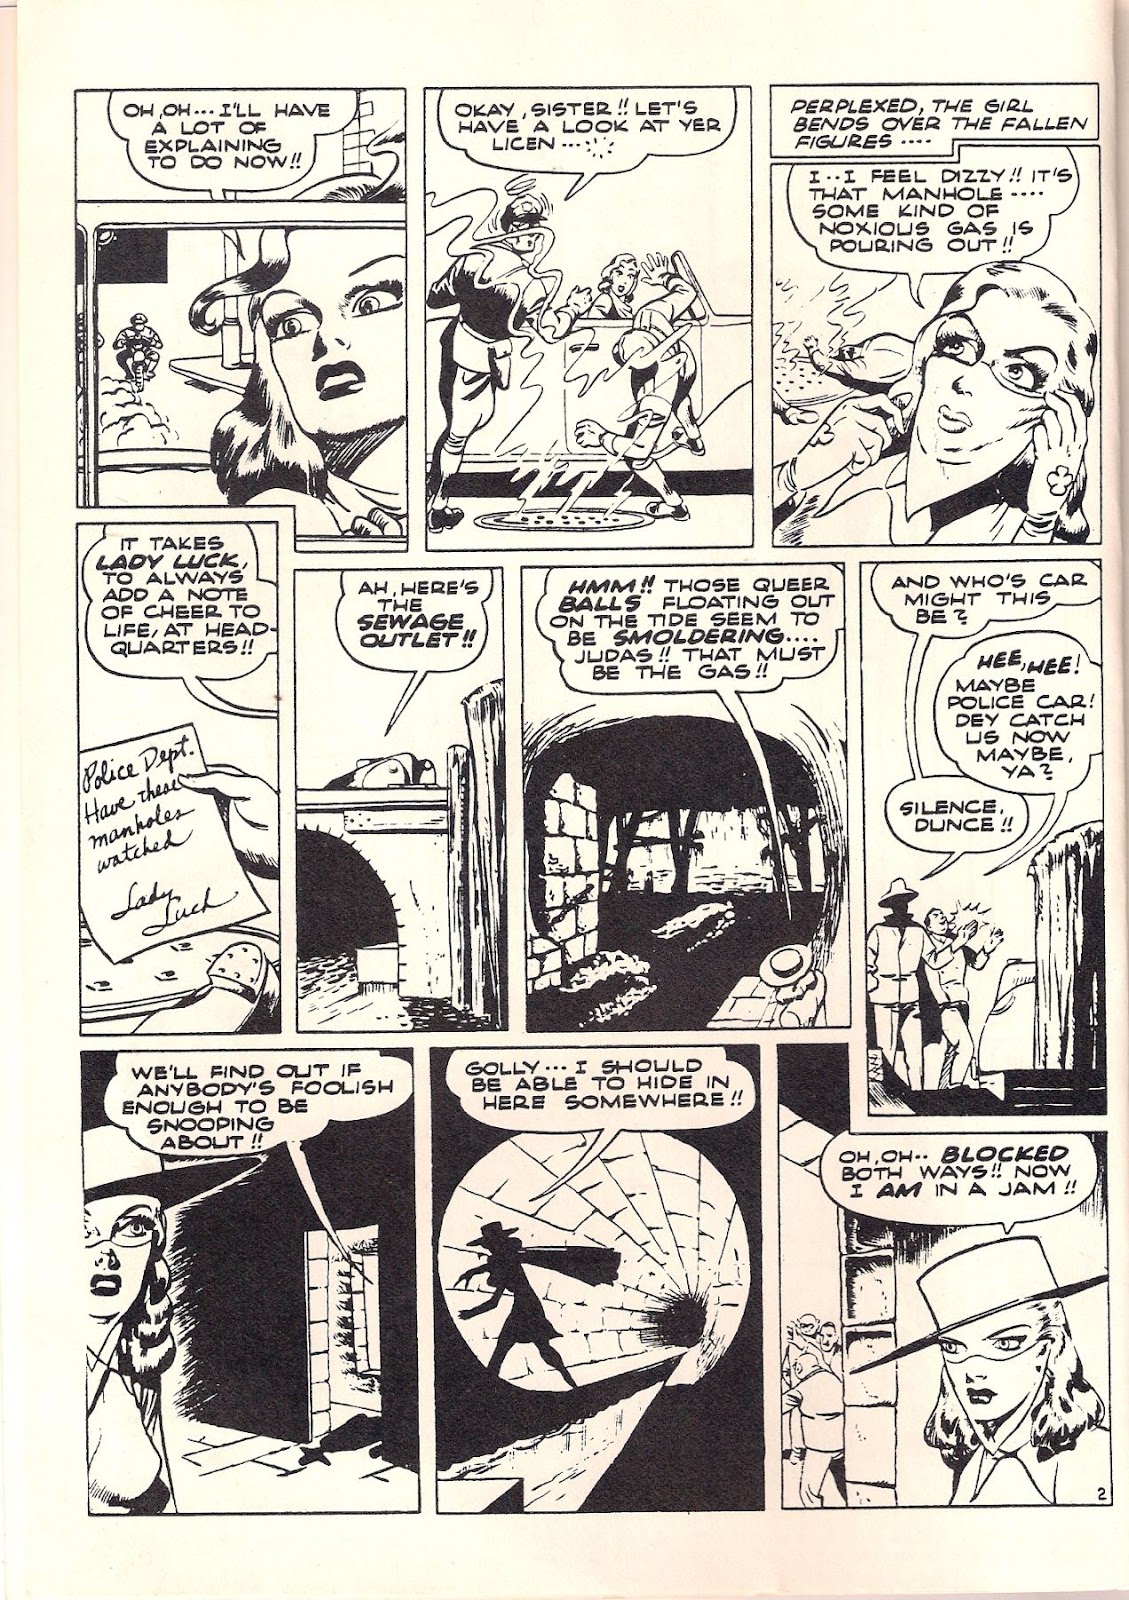 Lady Luck (1980) issue 1 - Page 4